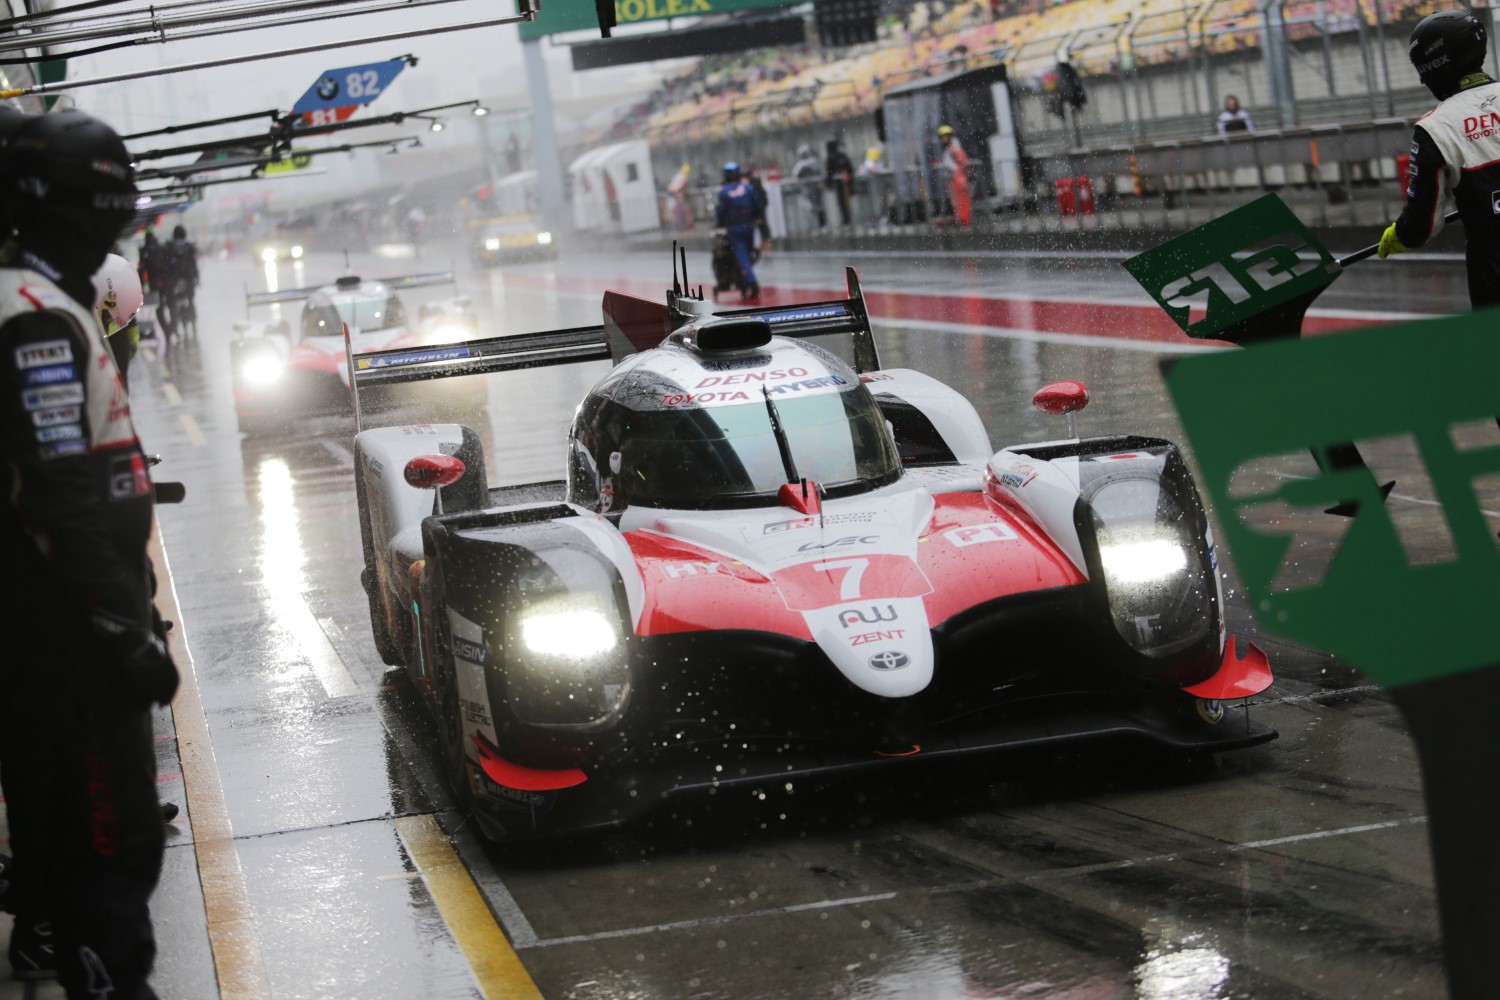 The #7 Toyota wins a wet miserable race in Shanghai